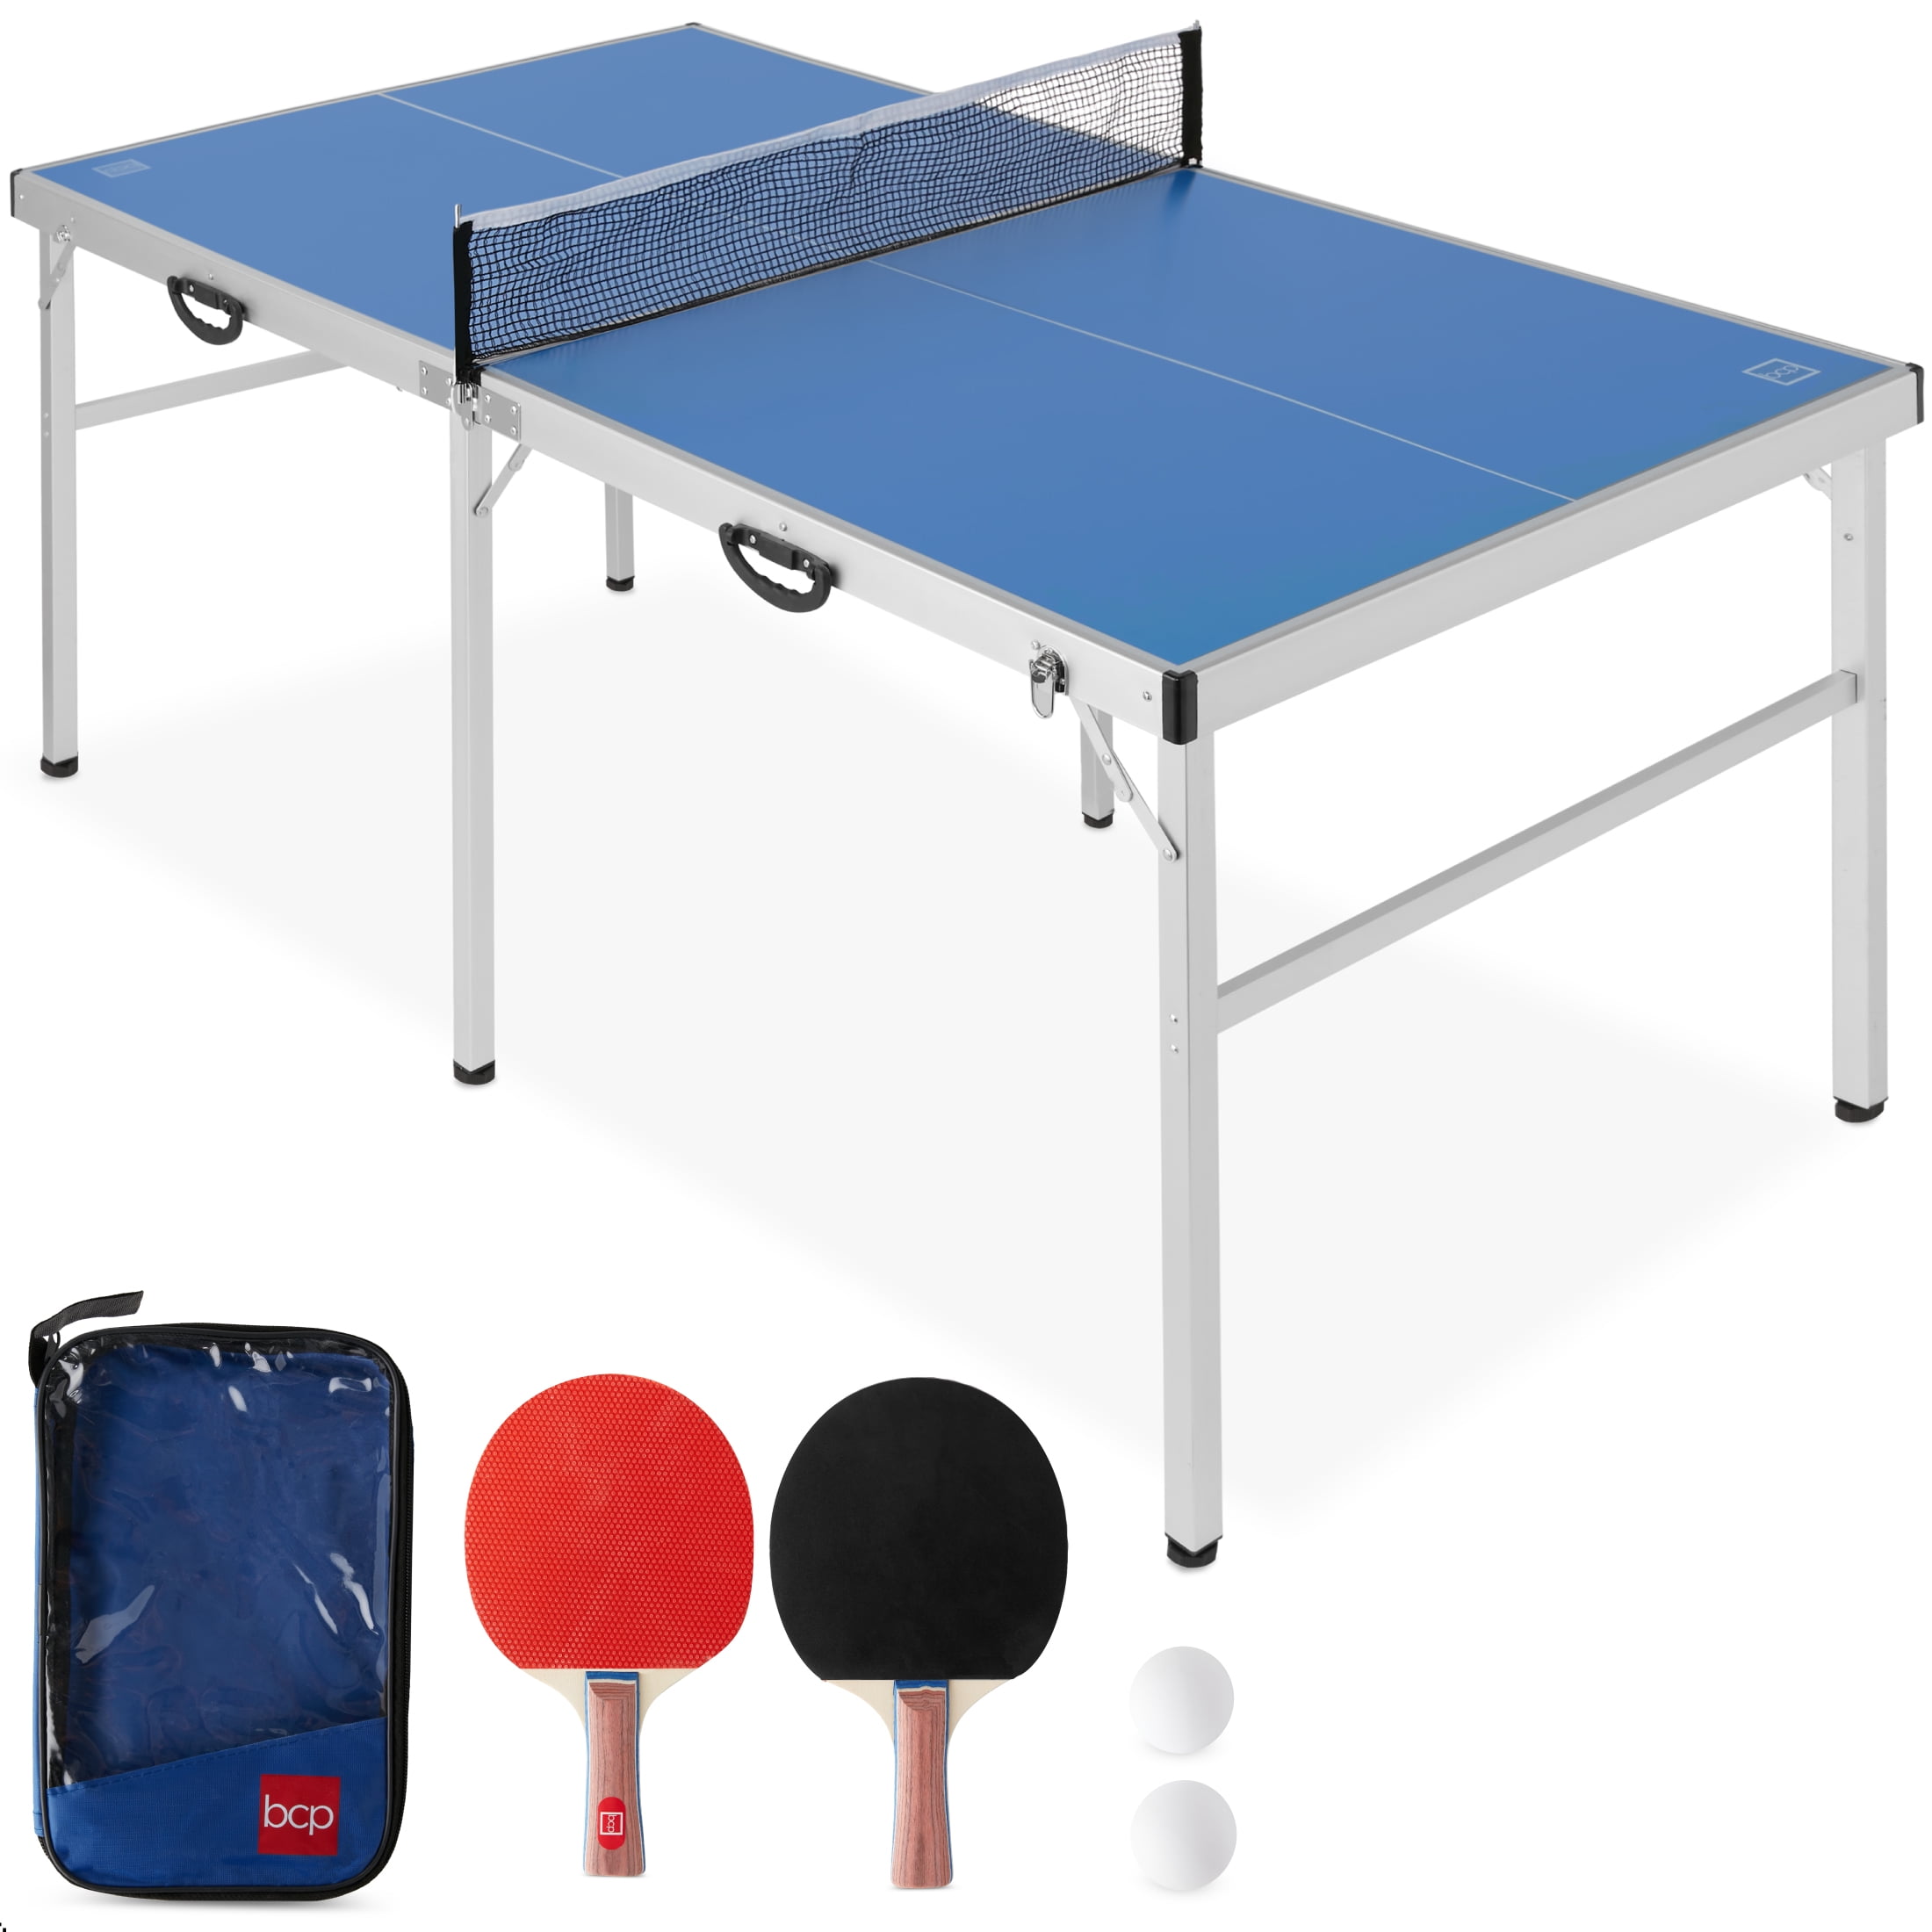 GLD Products Viper Table Tennis Paddle Set of 2 for sale online 